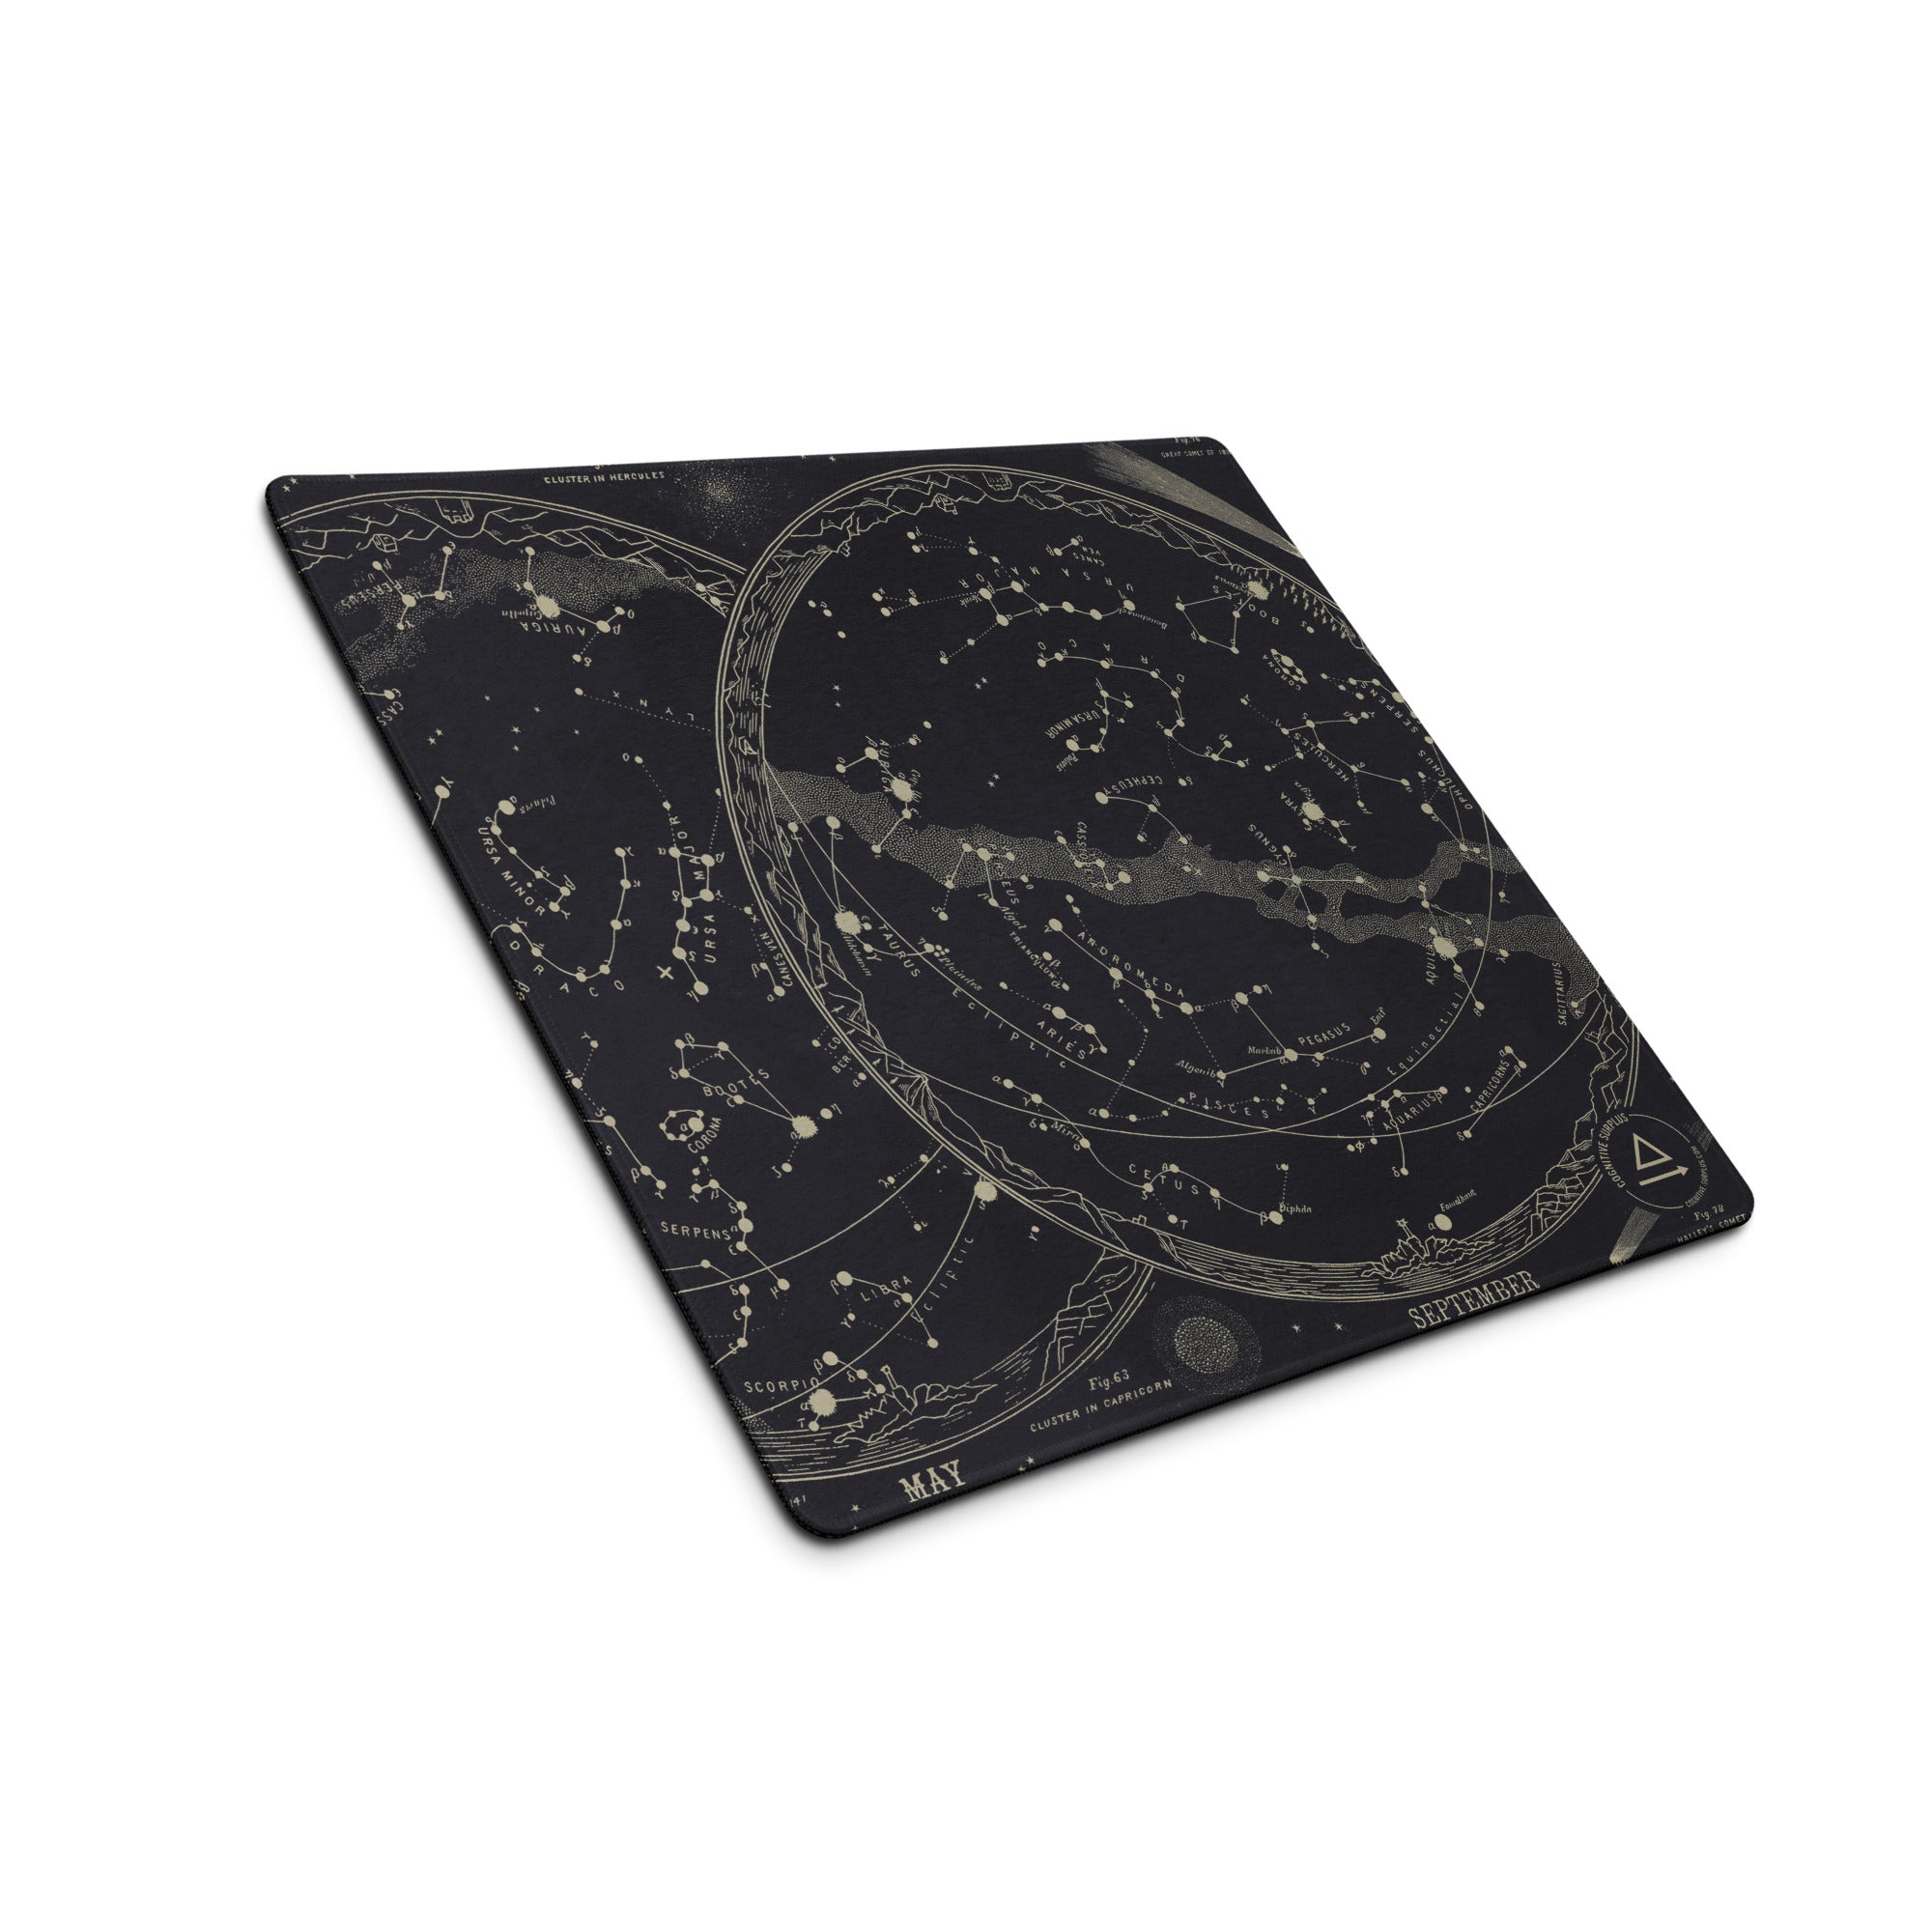 gaming-mouse-pad-white-18x16-front-6595dc643c152.jpg